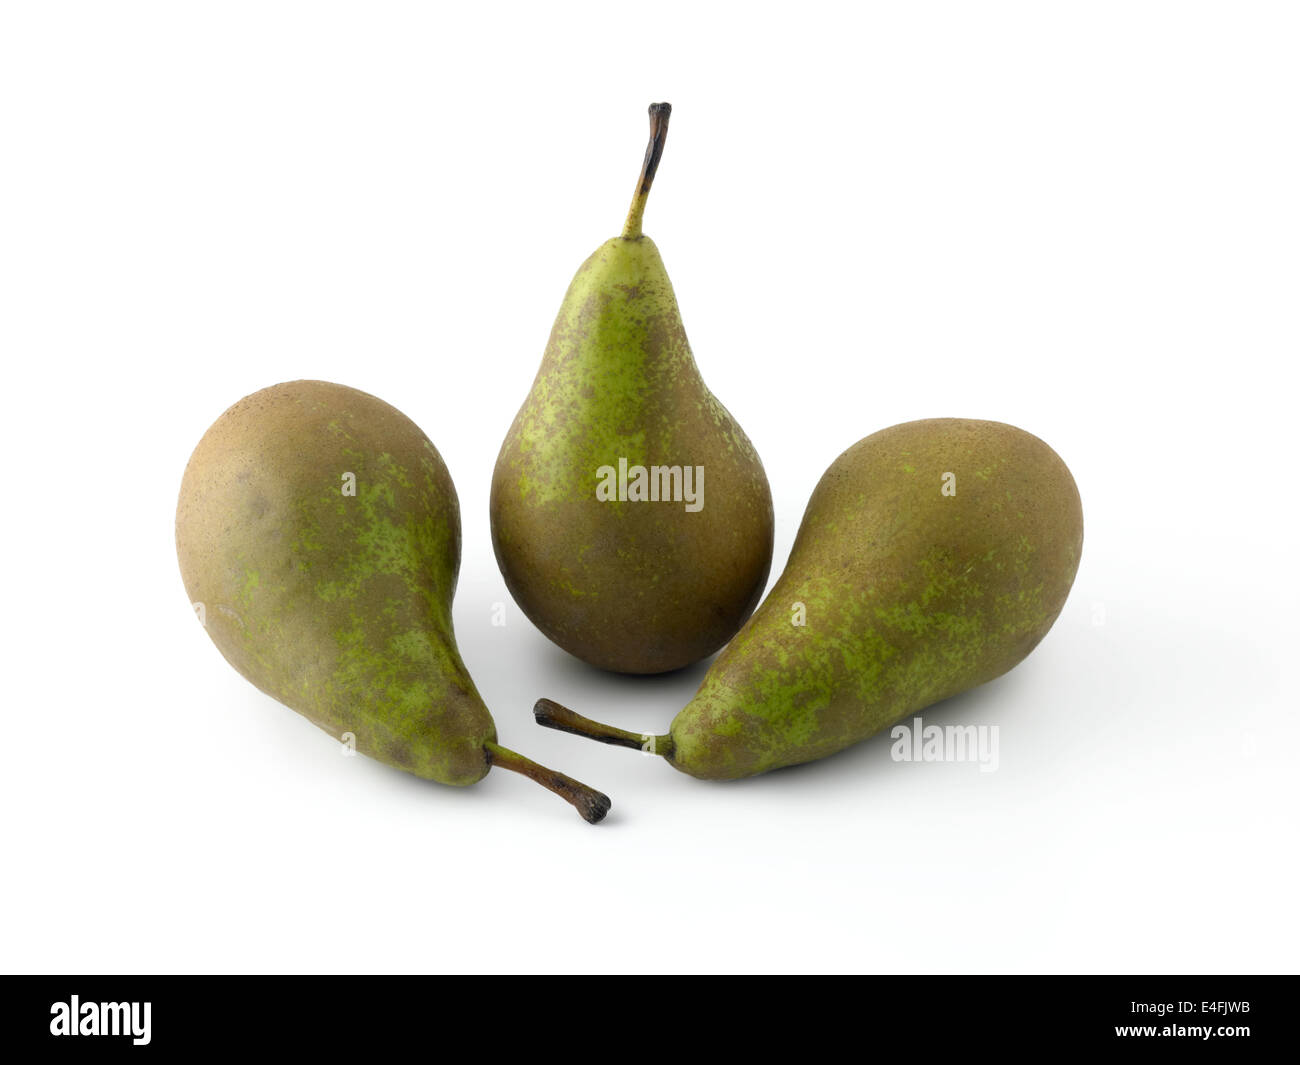 conference pears Stock Photo